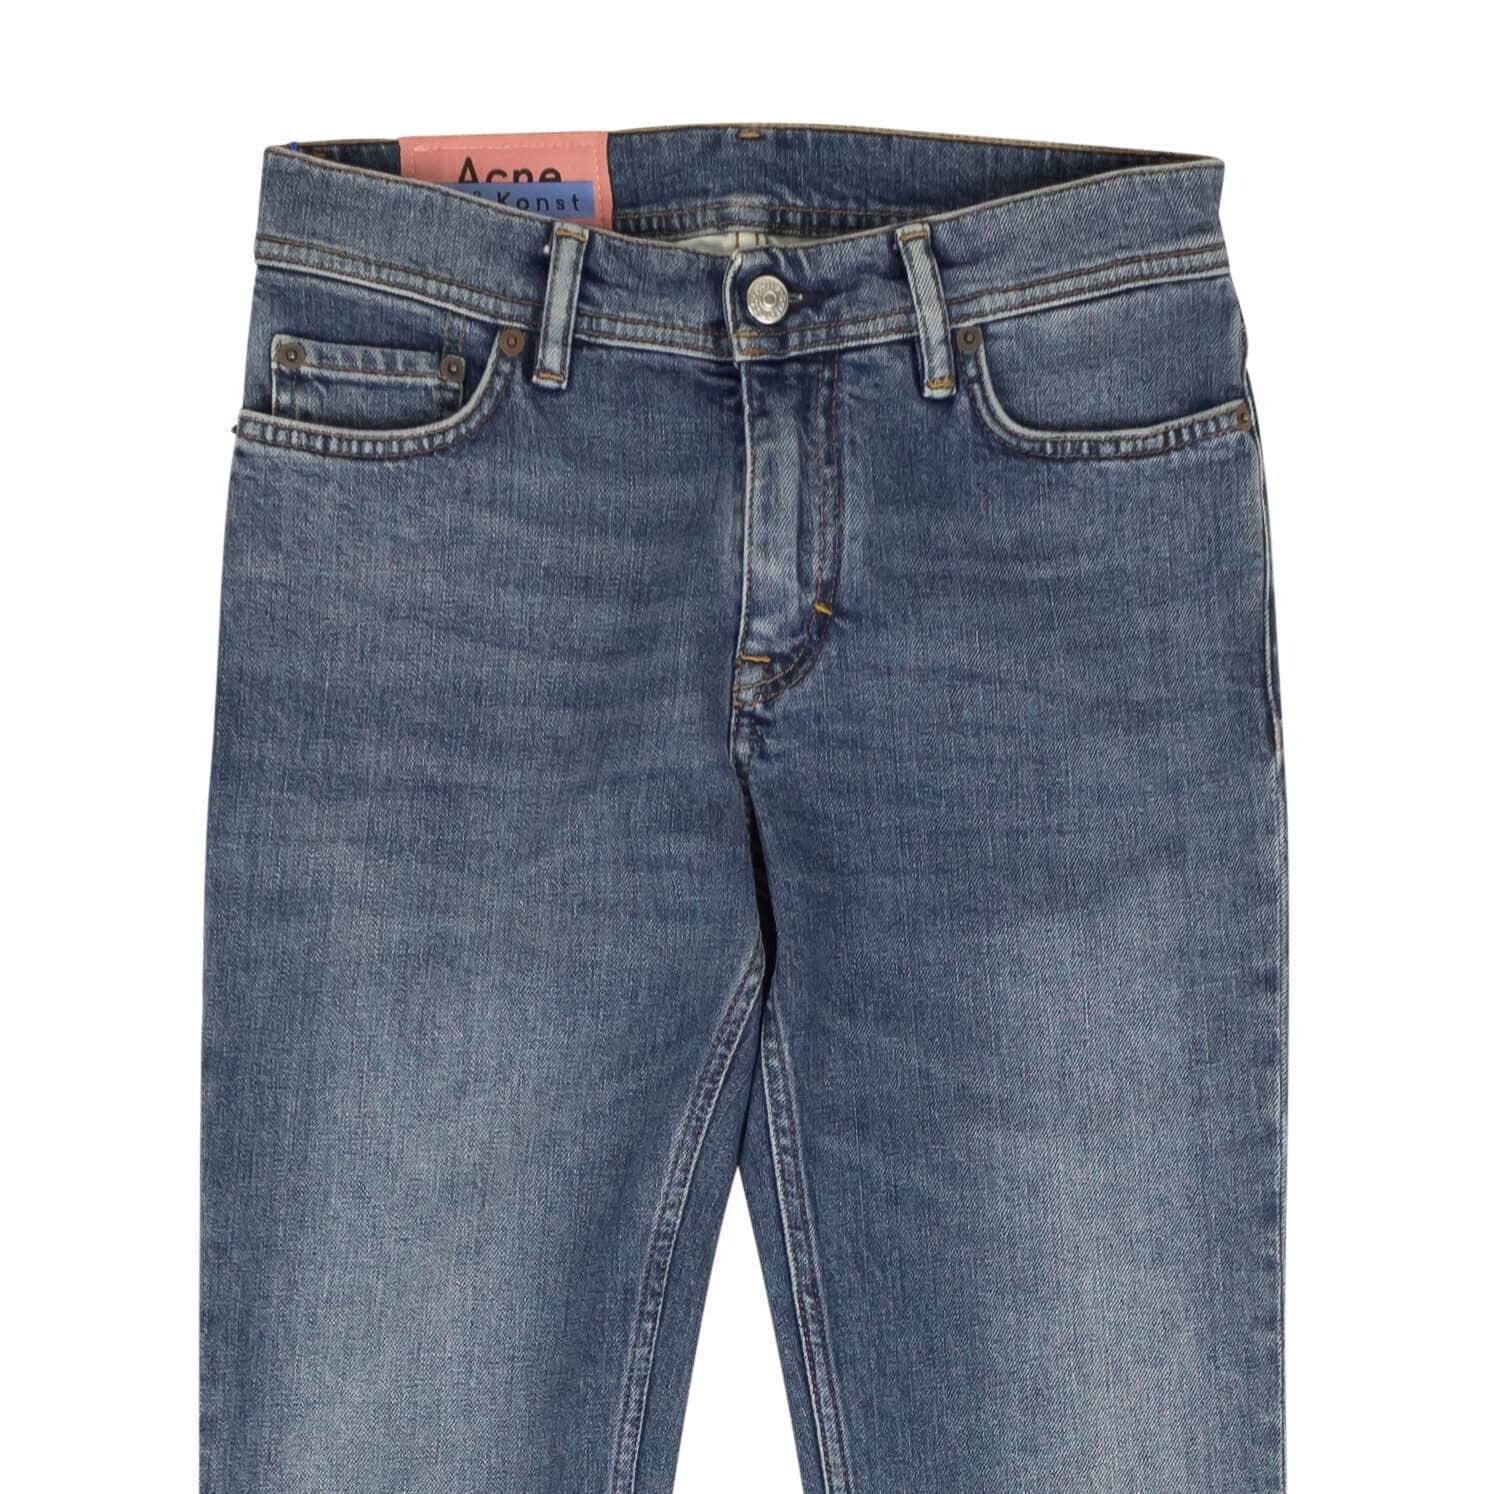 Acne Studios acne-studios, channelenable-all, chicmi, couponcollection, gender-mens, main-clothing, mens-shoes, mens-straight-fit-jeans, size-28, size-29, size-30, size-31, size-33, size-34, under-250 Mid Blue North Denim Jeans